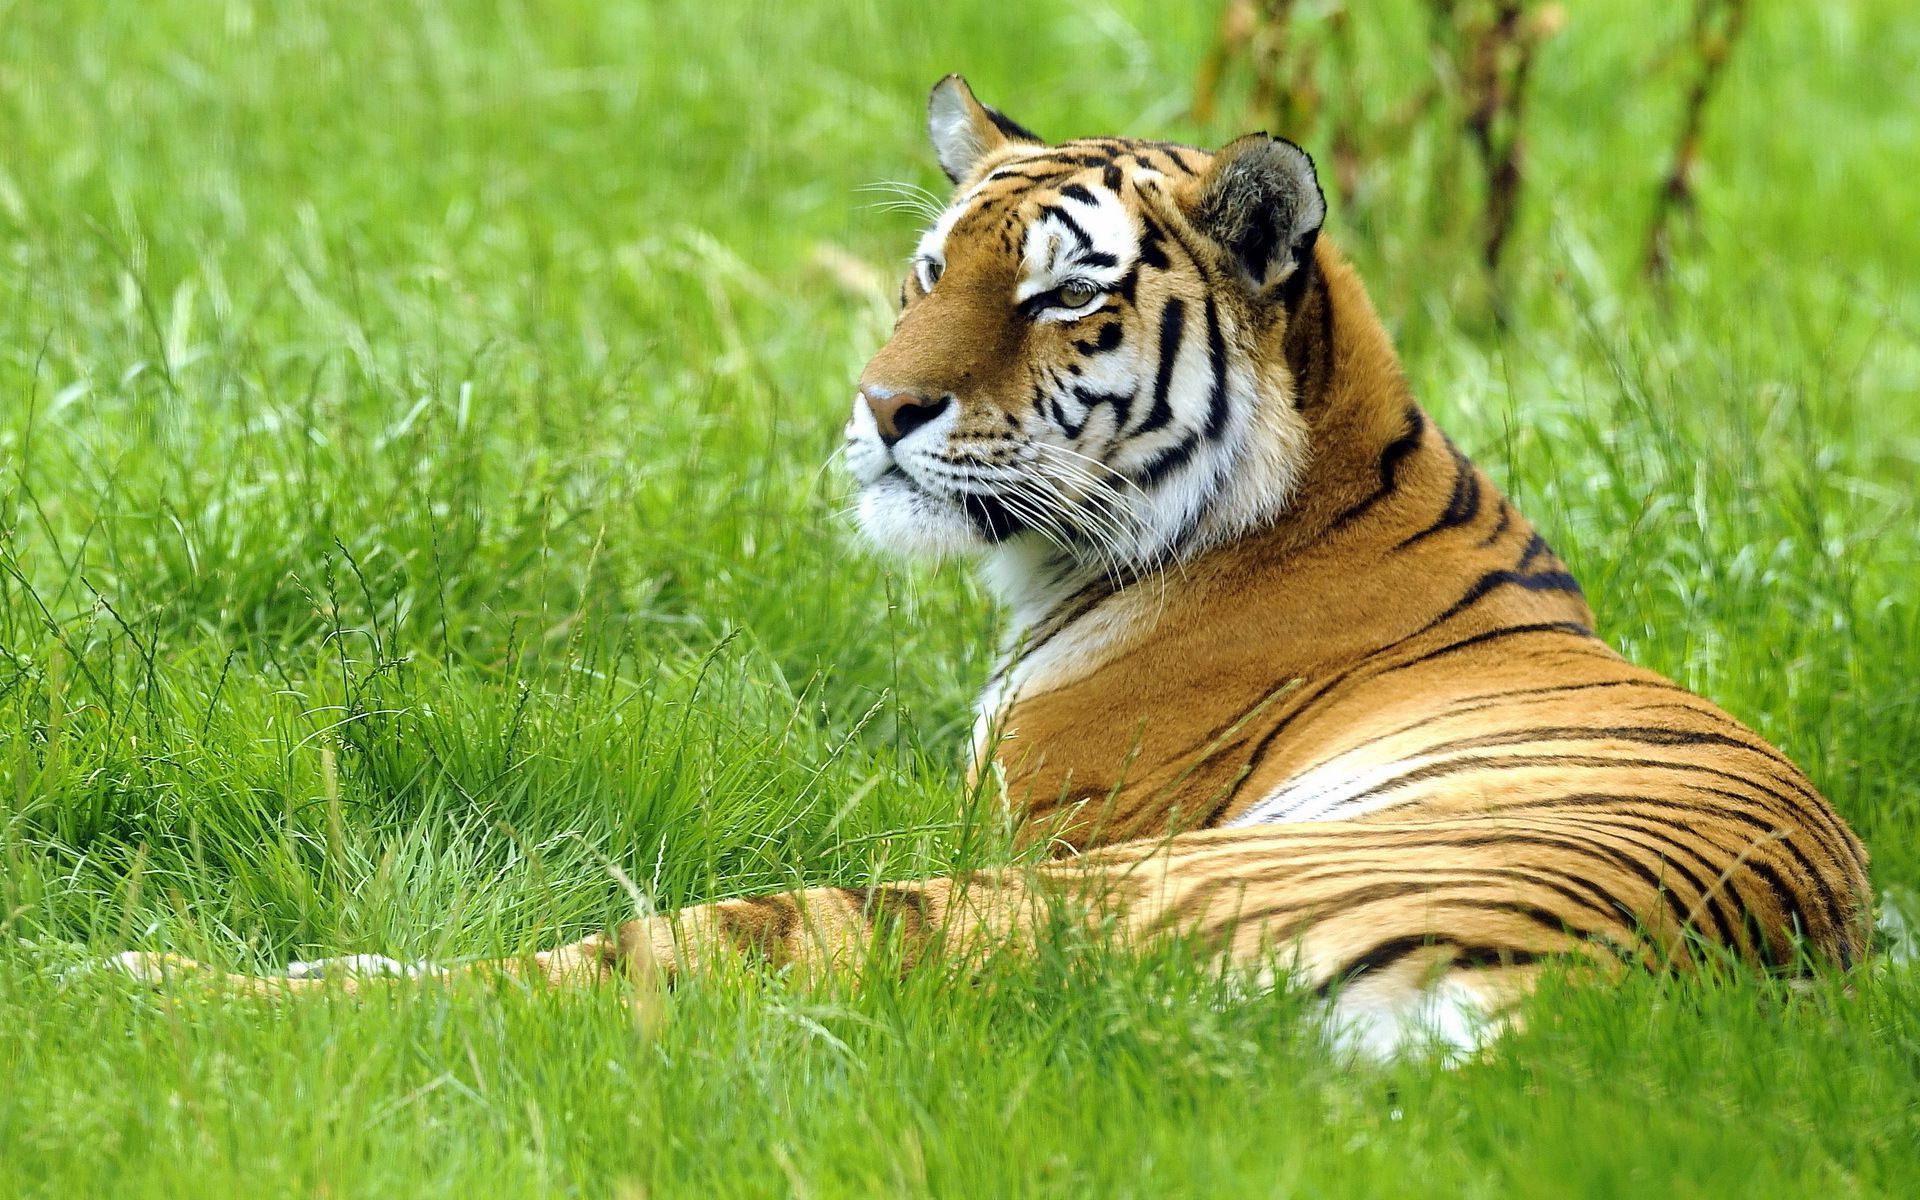 Green Grass Tiger HD Images | HD Wallpapers